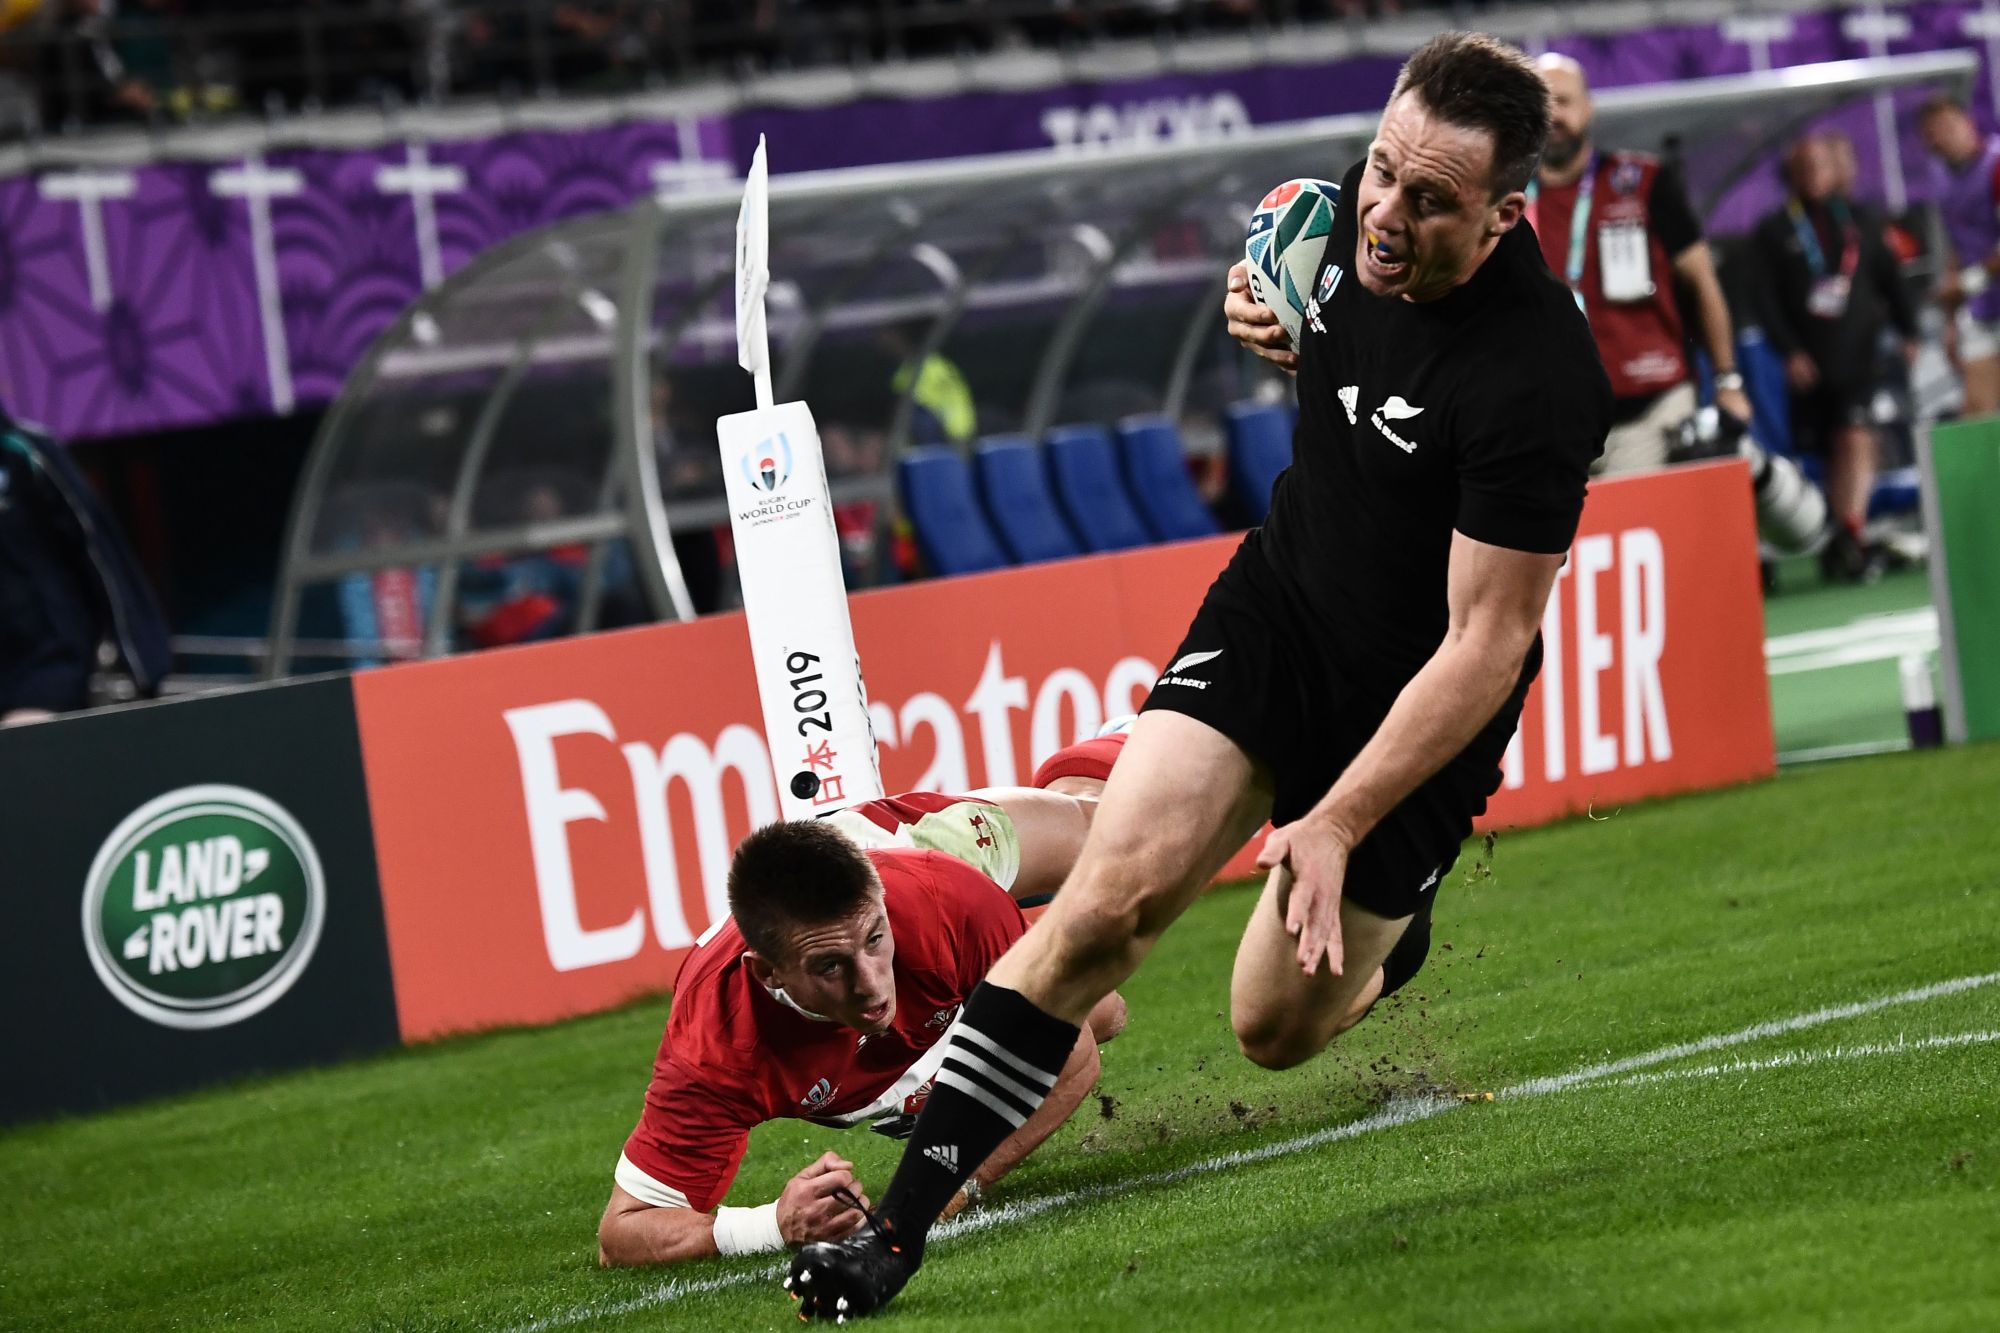 New Zealand hammers Wales in bronze-medal match